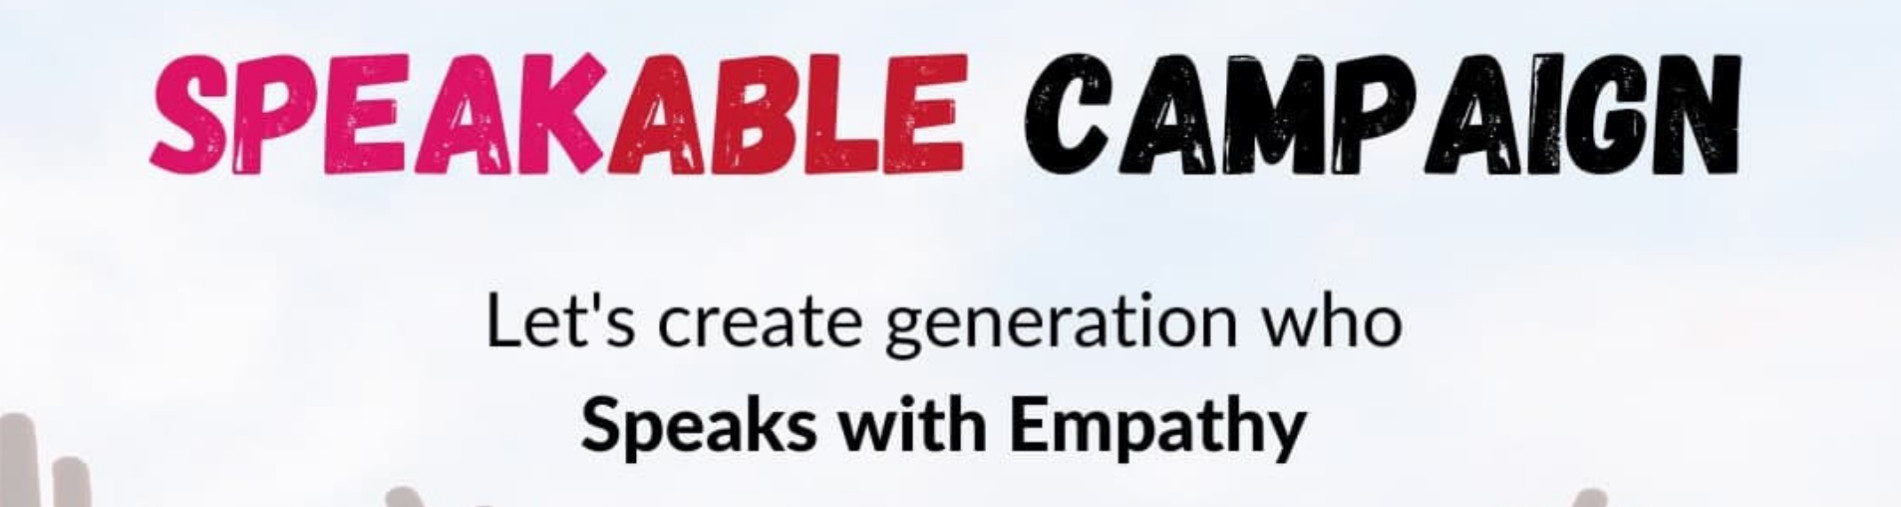 Crowdfunding for SpeakAble Campaign